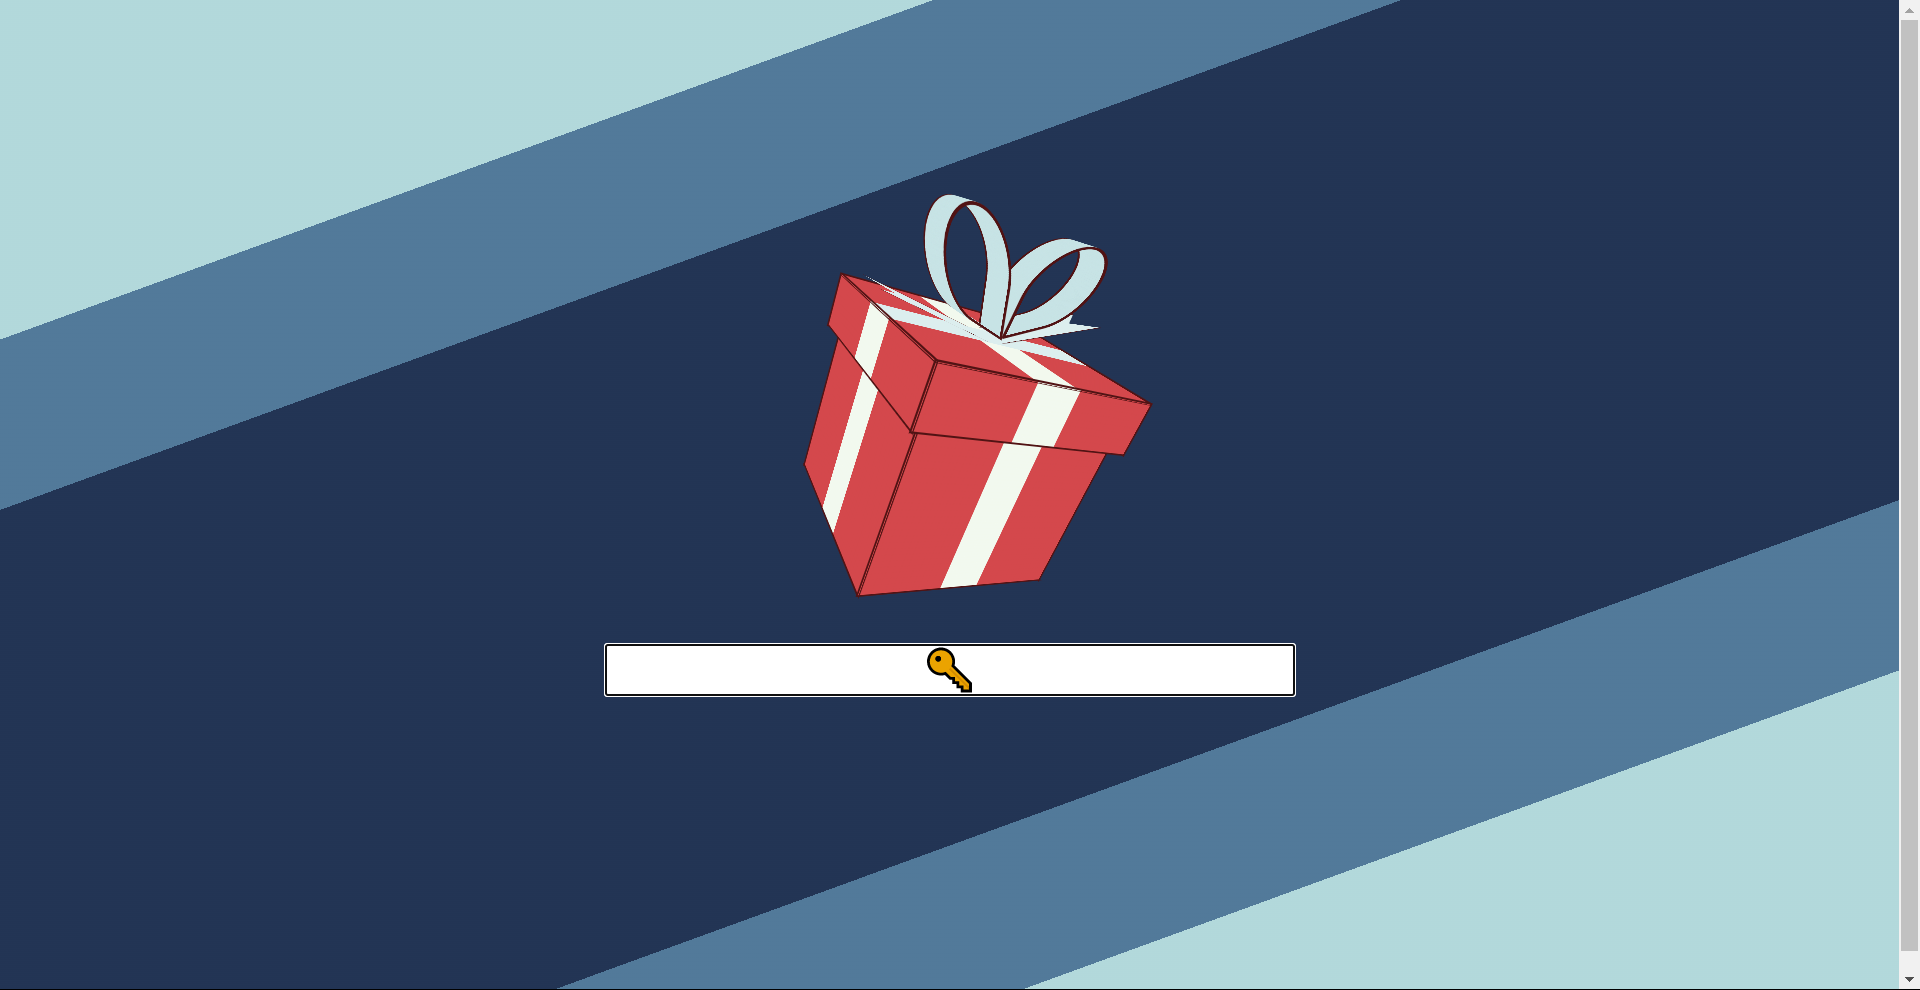 A rotating wrapped gift box with a text field below it prompting for a password.